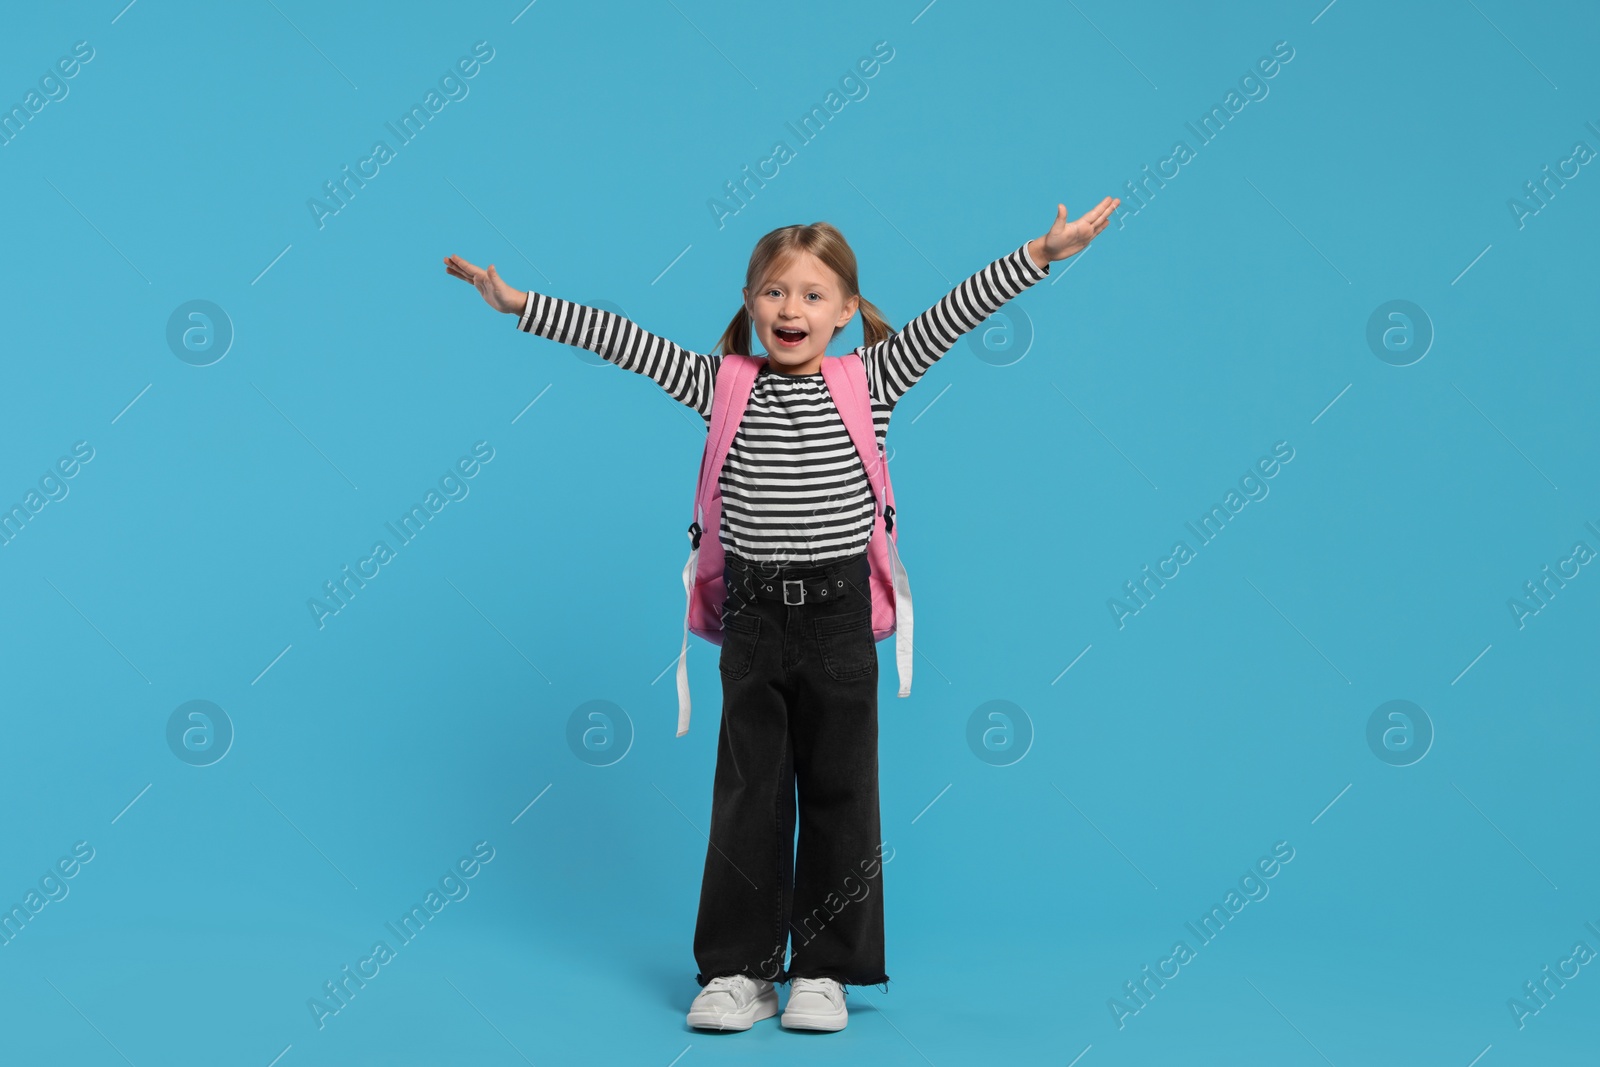 Photo of Happy schoolgirl with backpack on light blue background